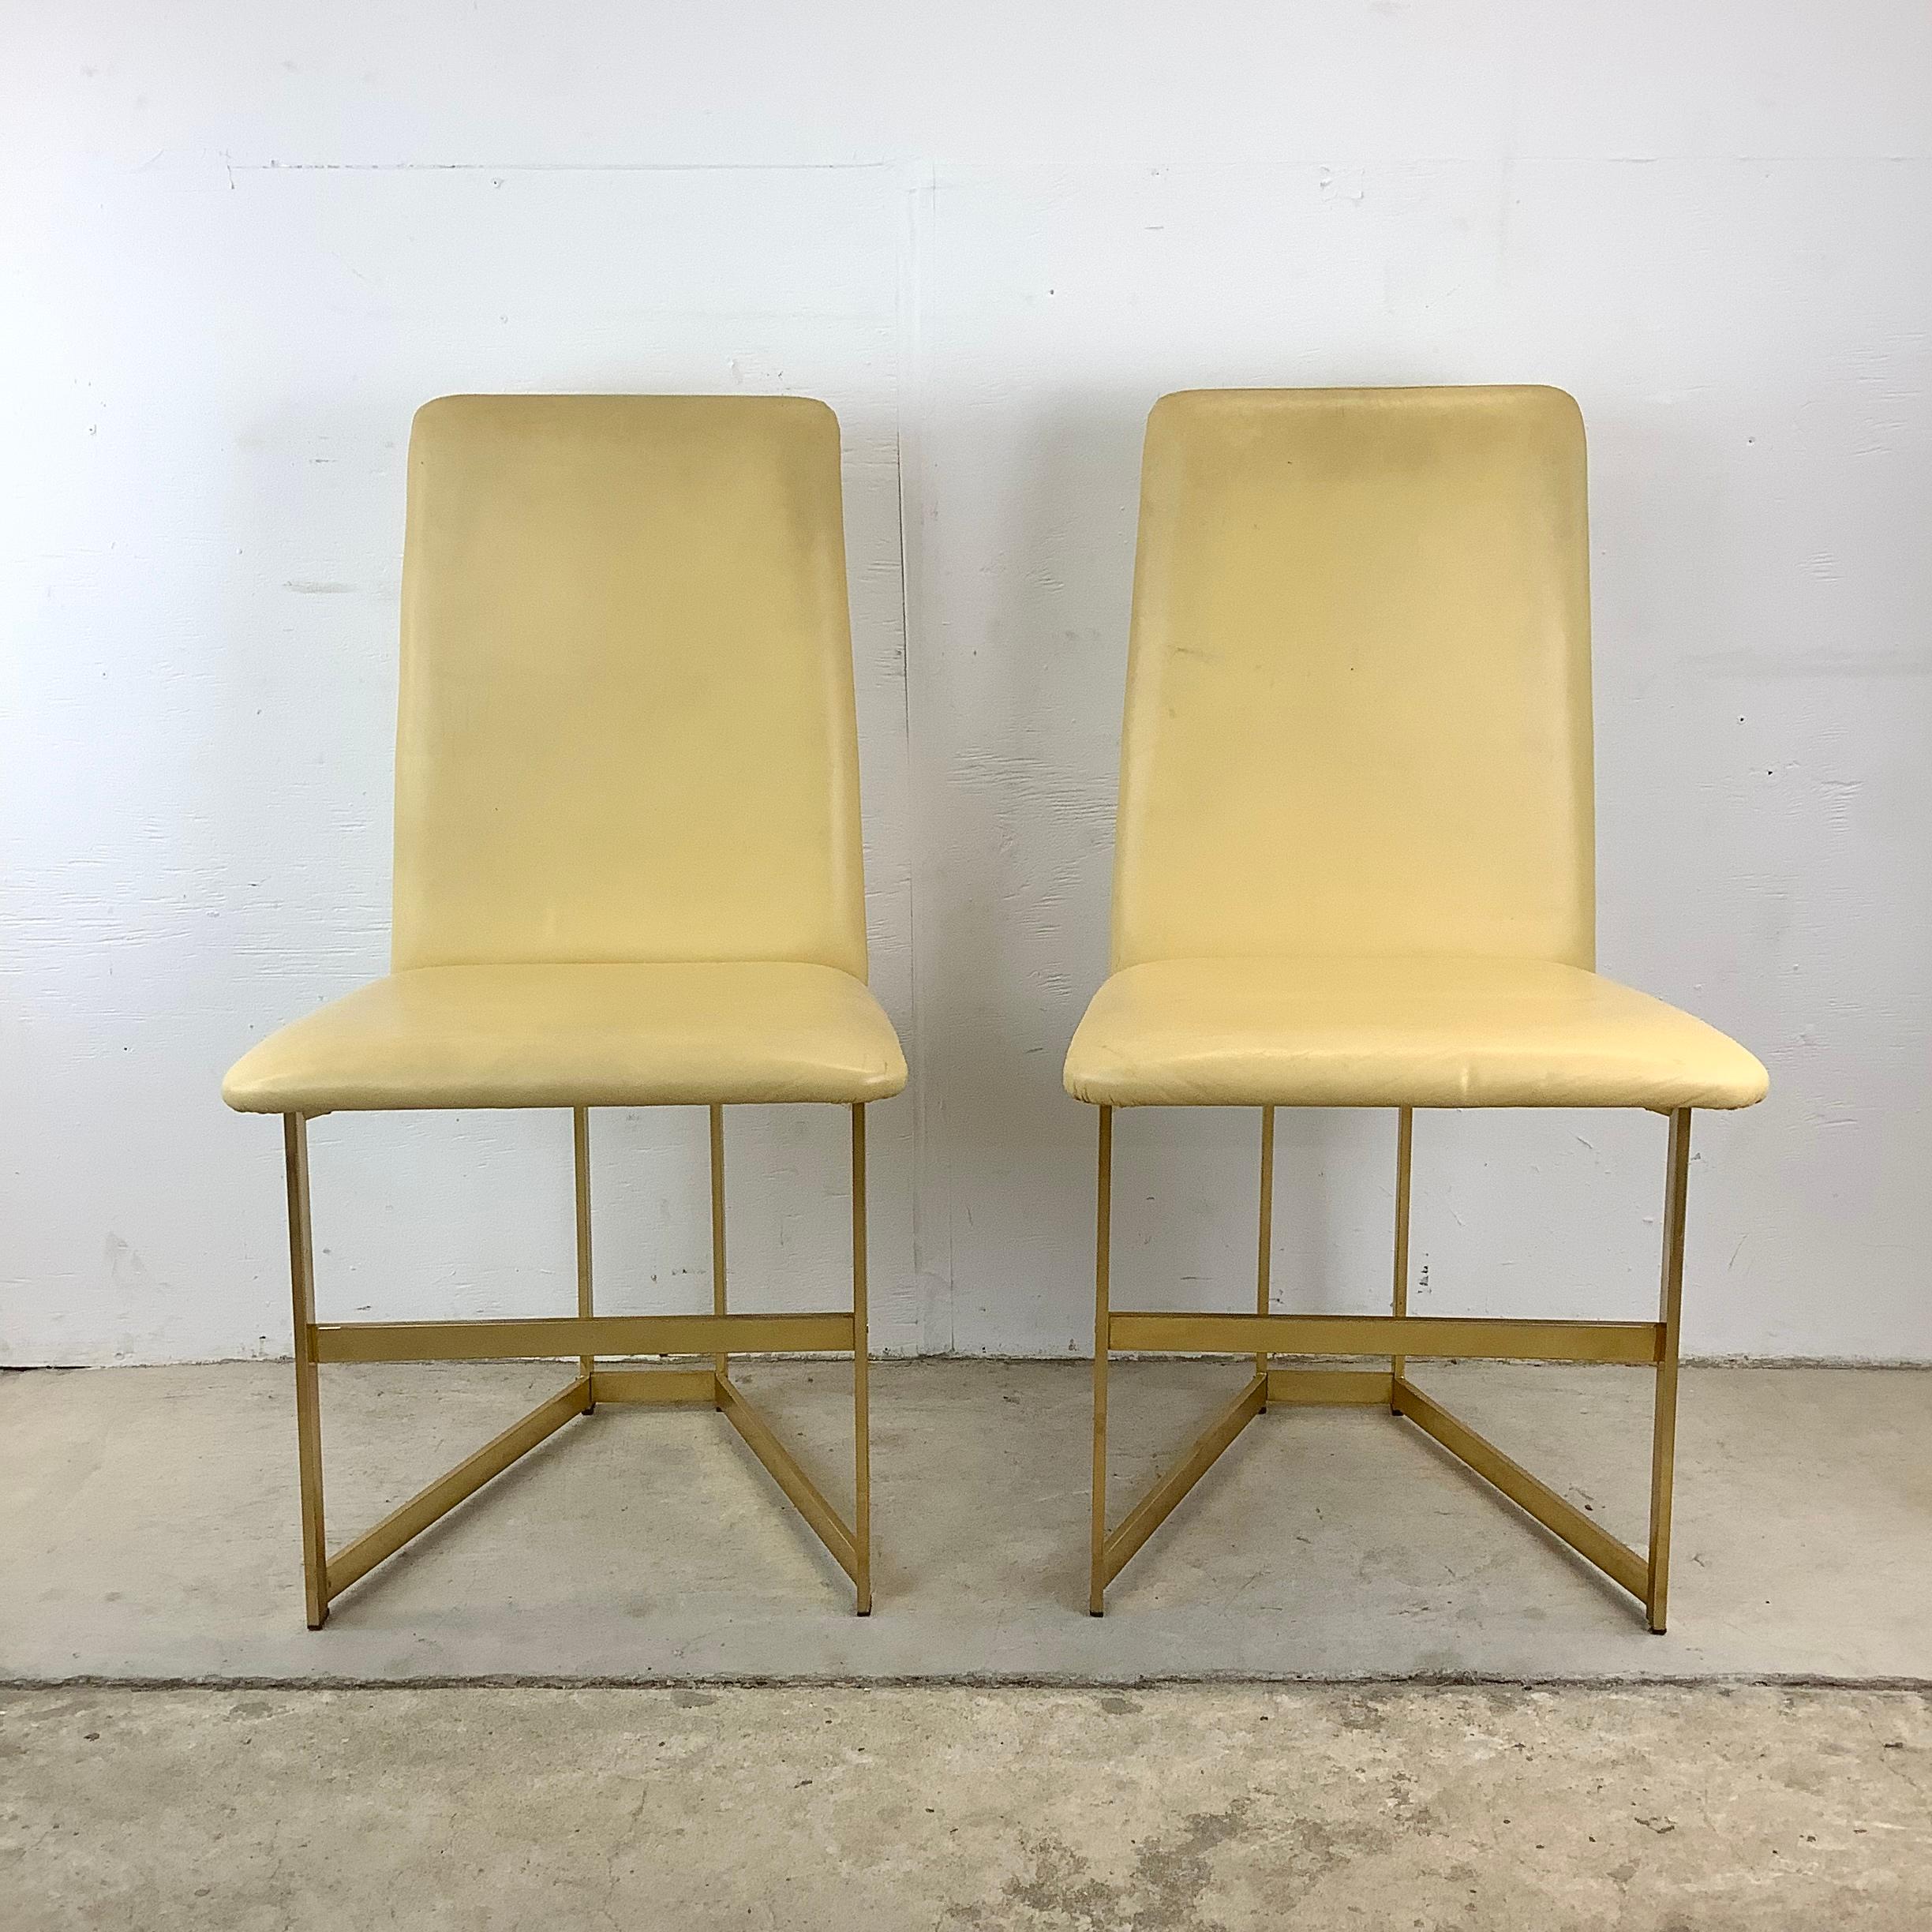 Experience the fusion of vintage elegance and contemporary design with these Mid-Century Style Highback Dining Chairs. This pair is a stunning example of modern design meeting functional art. The chairs feature a sleek, minimalist frame made from